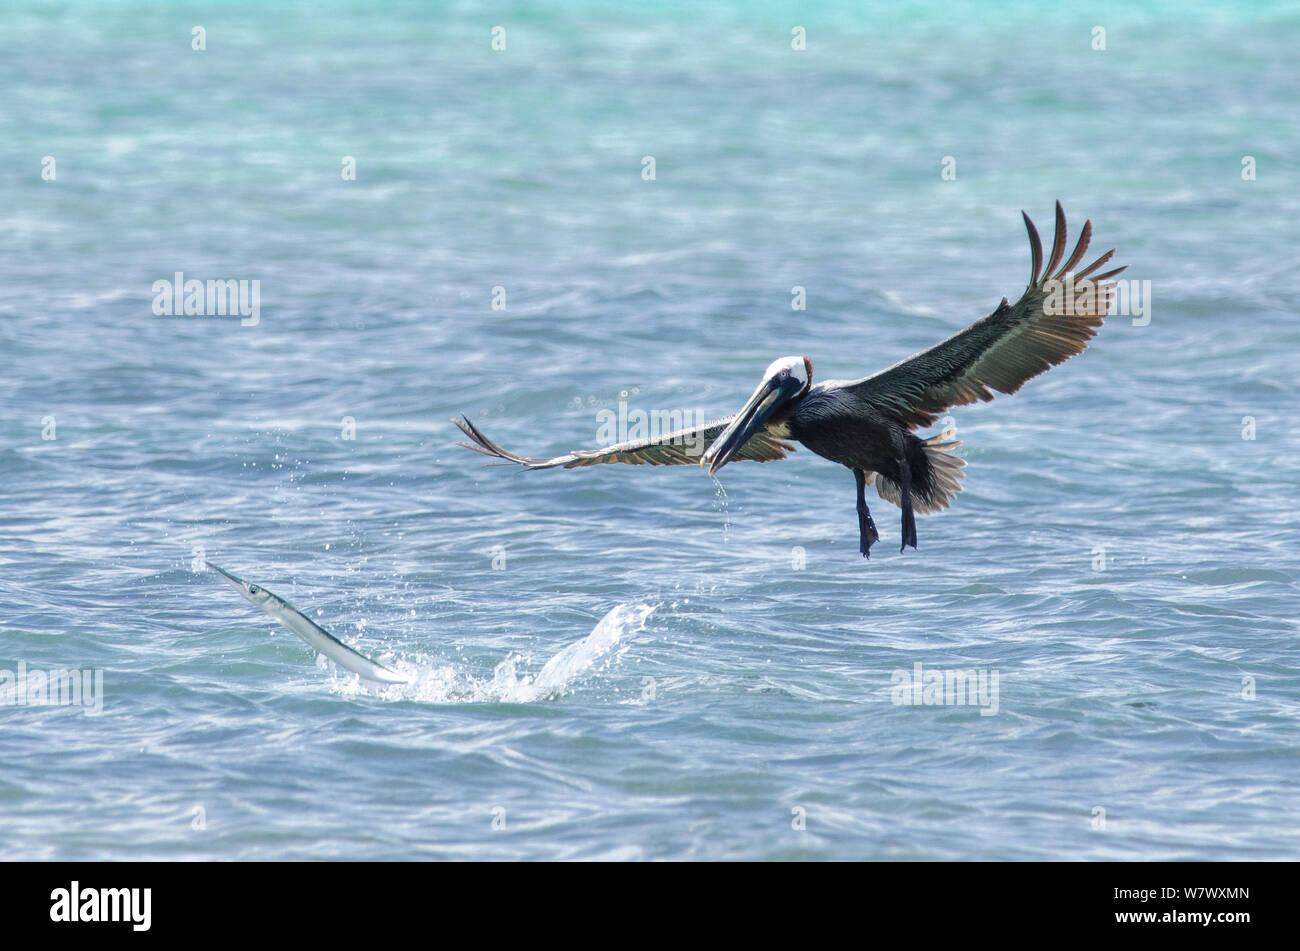 Houndfish (Tylosurus crocodilus) leaping from water after being disturbed by plunge-diving brown pelican (Pelecanus occidentalis). Cenote Manati, Riviera Maya, Yucatan, Mexico. September. Stock Photo